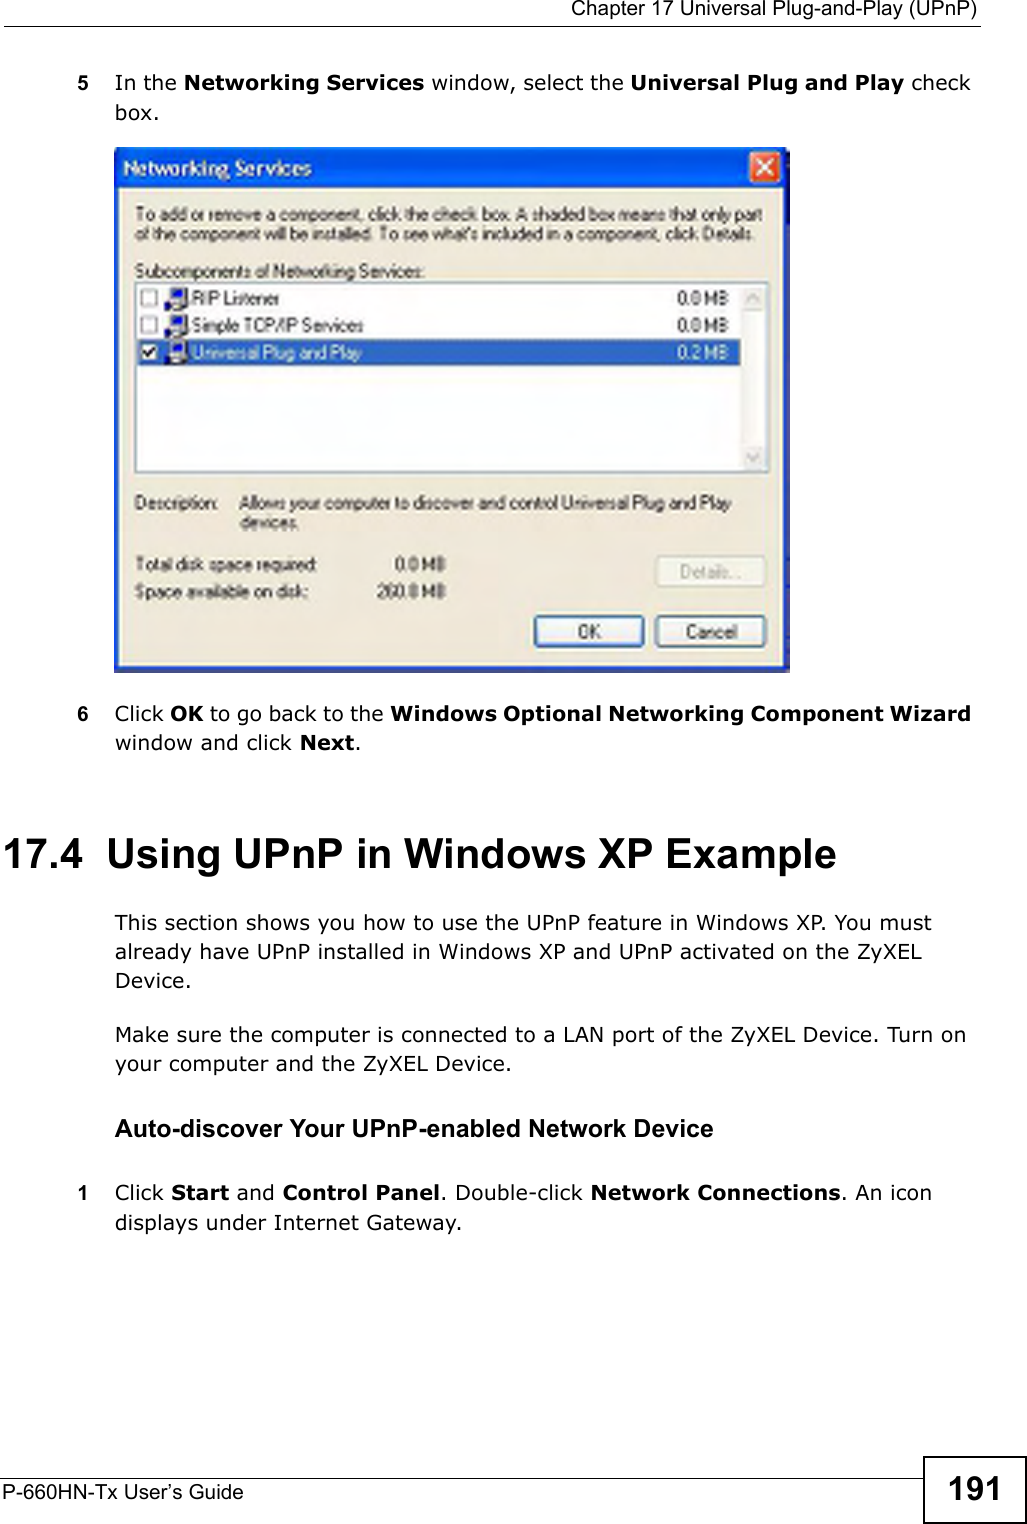  Chapter 17 Universal Plug-and-Play (UPnP)P-660HN-Tx User’s Guide 1915In the Networking Services window, select the Universal Plug and Play check box. Networking Services6Click OK to go back to the Windows Optional Networking Component Wizard window and click Next. 17.4  Using UPnP in Windows XP ExampleThis section shows you how to use the UPnP feature in Windows XP. You must already have UPnP installed in Windows XP and UPnP activated on the ZyXEL Device.Make sure the computer is connected to a LAN port of the ZyXEL Device. Turn on your computer and the ZyXEL Device. Auto-discover Your UPnP-enabled Network Device1Click Start and Control Panel. Double-click Network Connections. An icon displays under Internet Gateway.